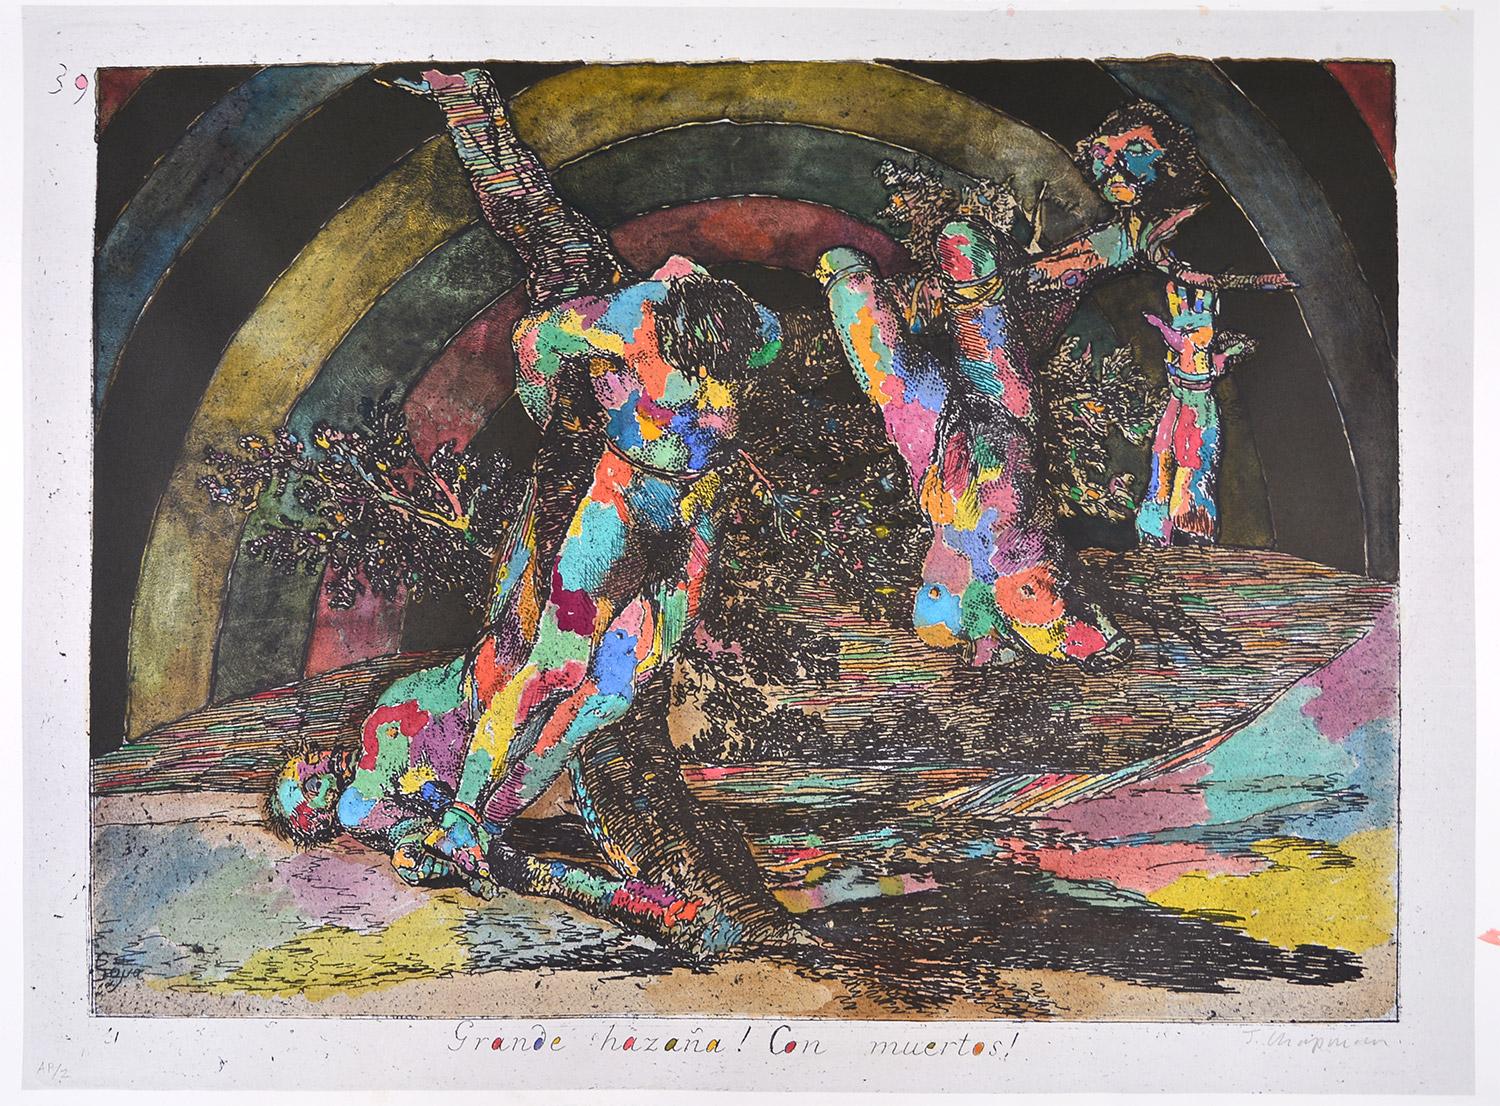 Jake Chapman - IN THE REALM OF THE RELENTLESS
Date of creation: 2022
Medium: Hand colored lithograph on paper
Edition: 6 AP, this work is numbered AP/2
Size: 80 x 110 cm
Condition: In mint conditions, brand new and never framed
Hand colored